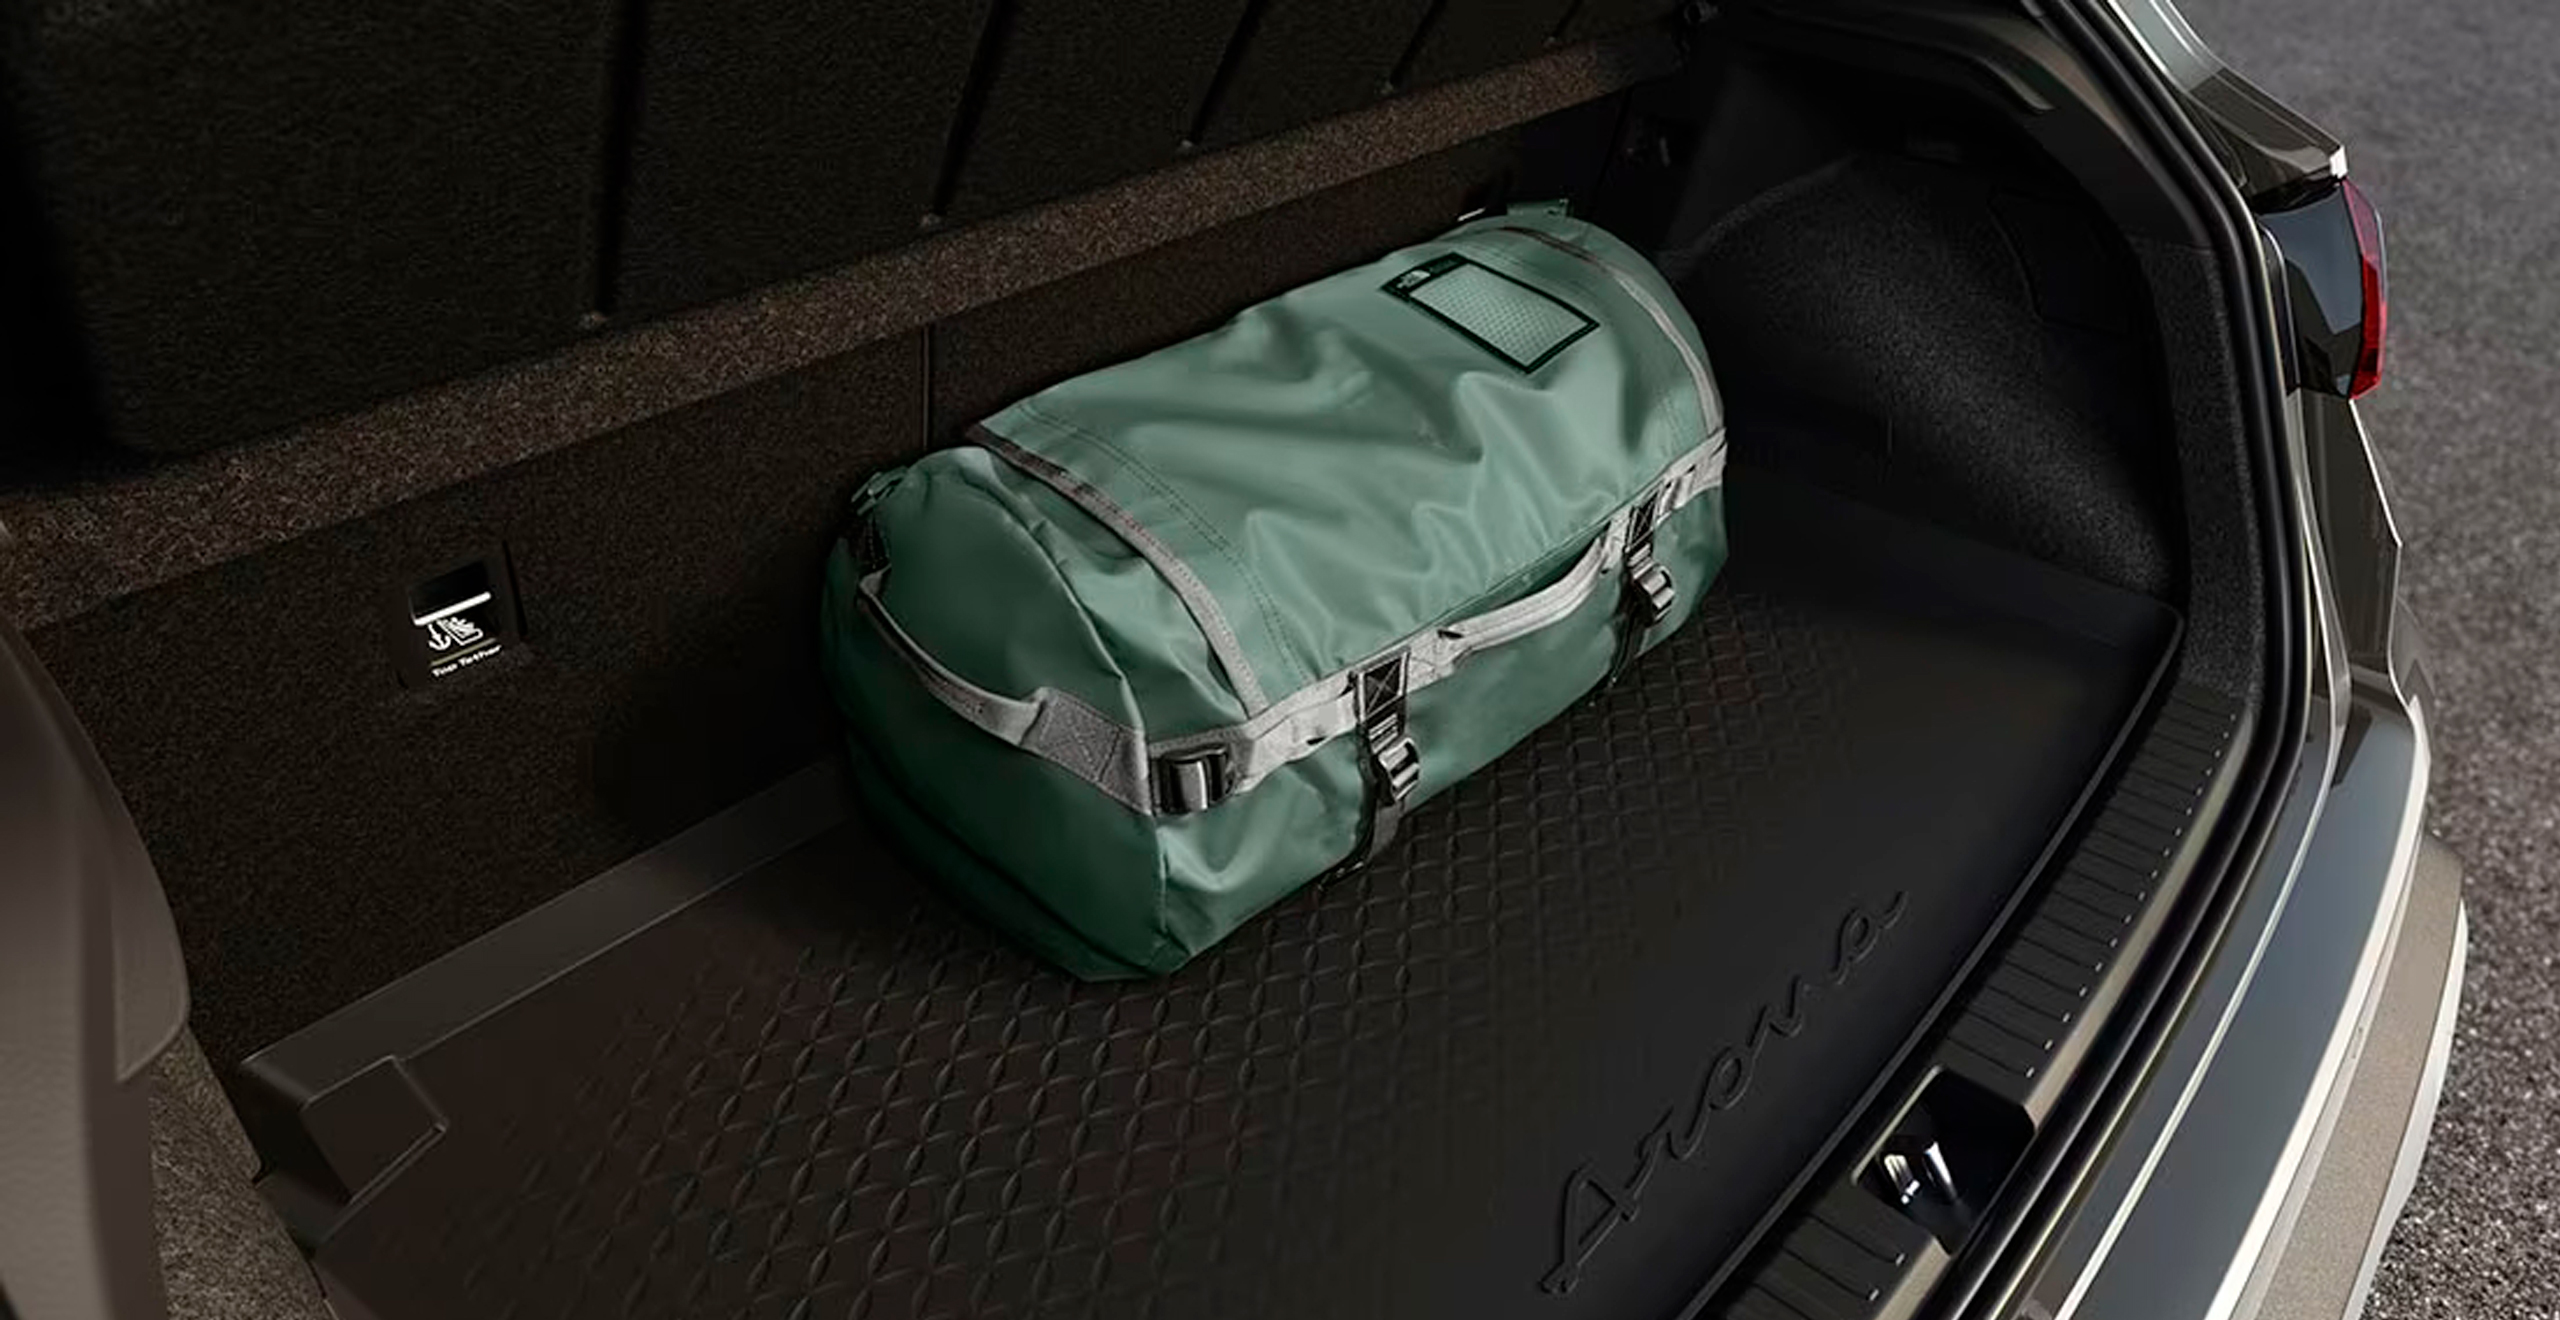 SEAT Arona 400 litre boot capacity design. Showing the SEAT Arona  car Trunk Organizer and boot space